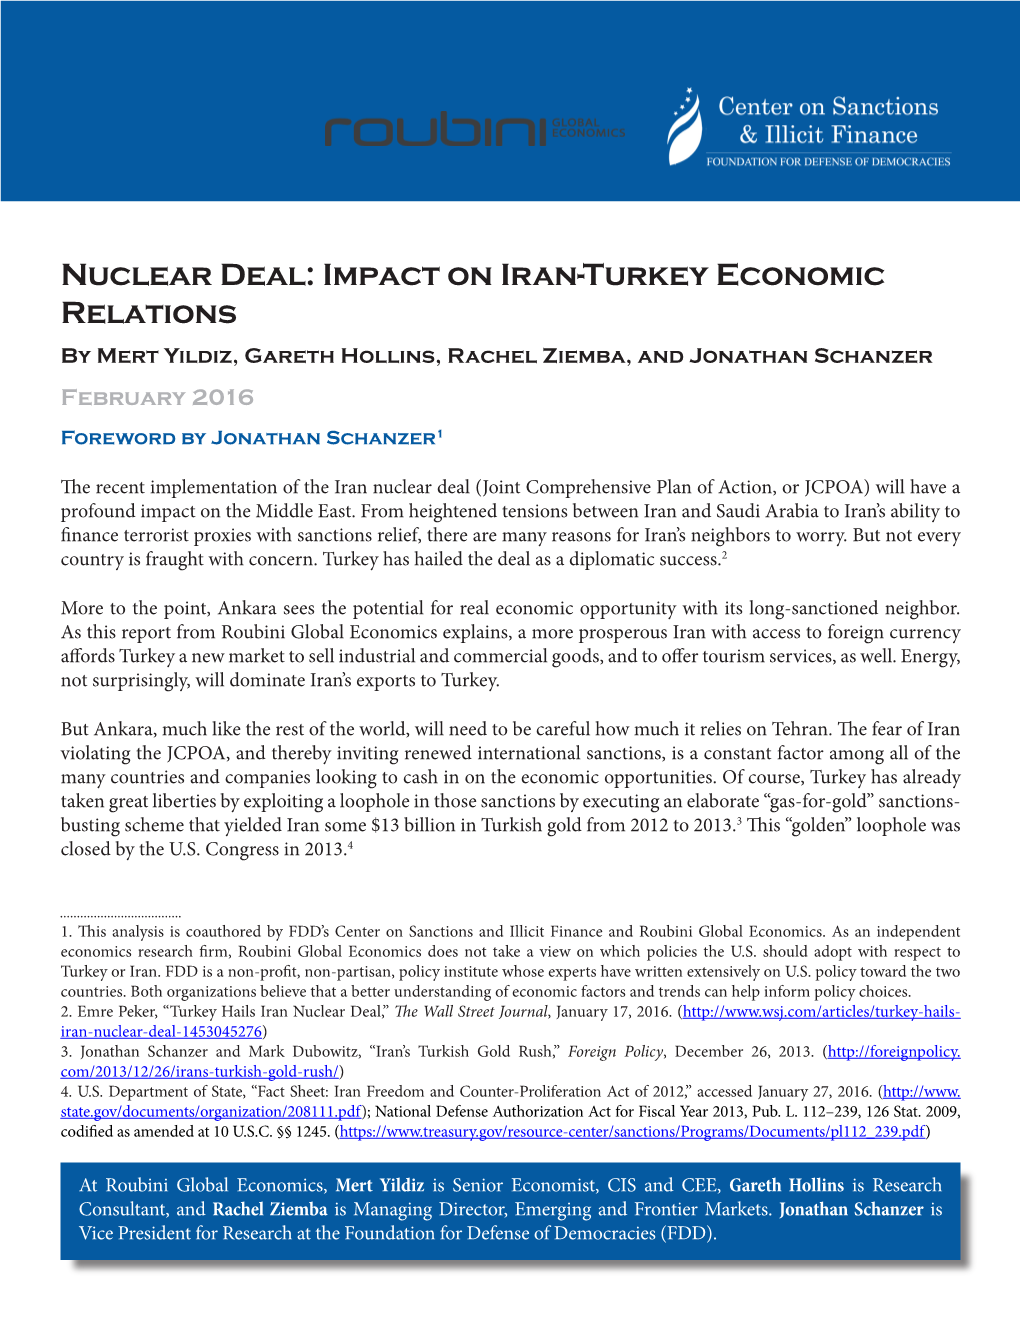 Nuclear Deal: Impact on Iran-Turkey Economic Relations